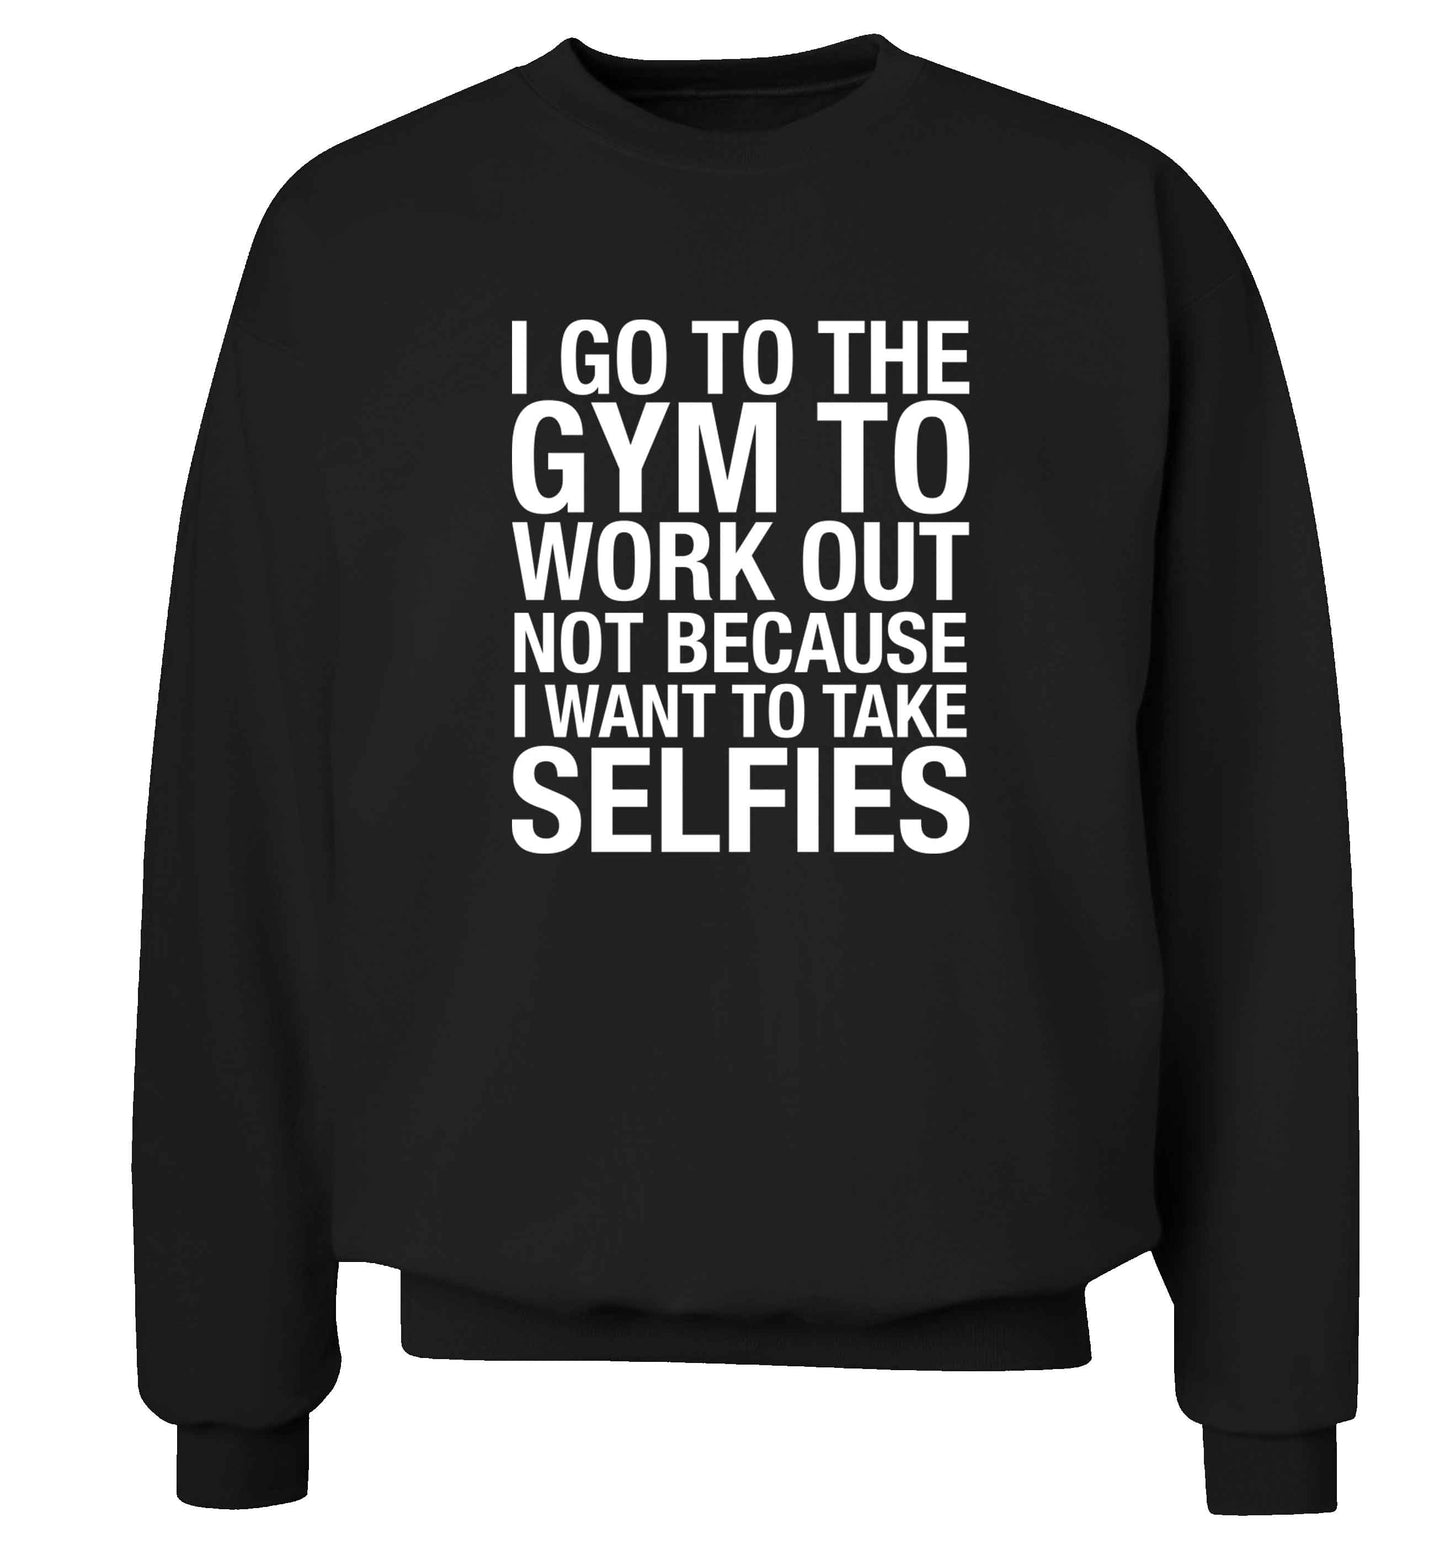 I go to the gym to workout not to take selfies adult's unisex black sweater 2XL